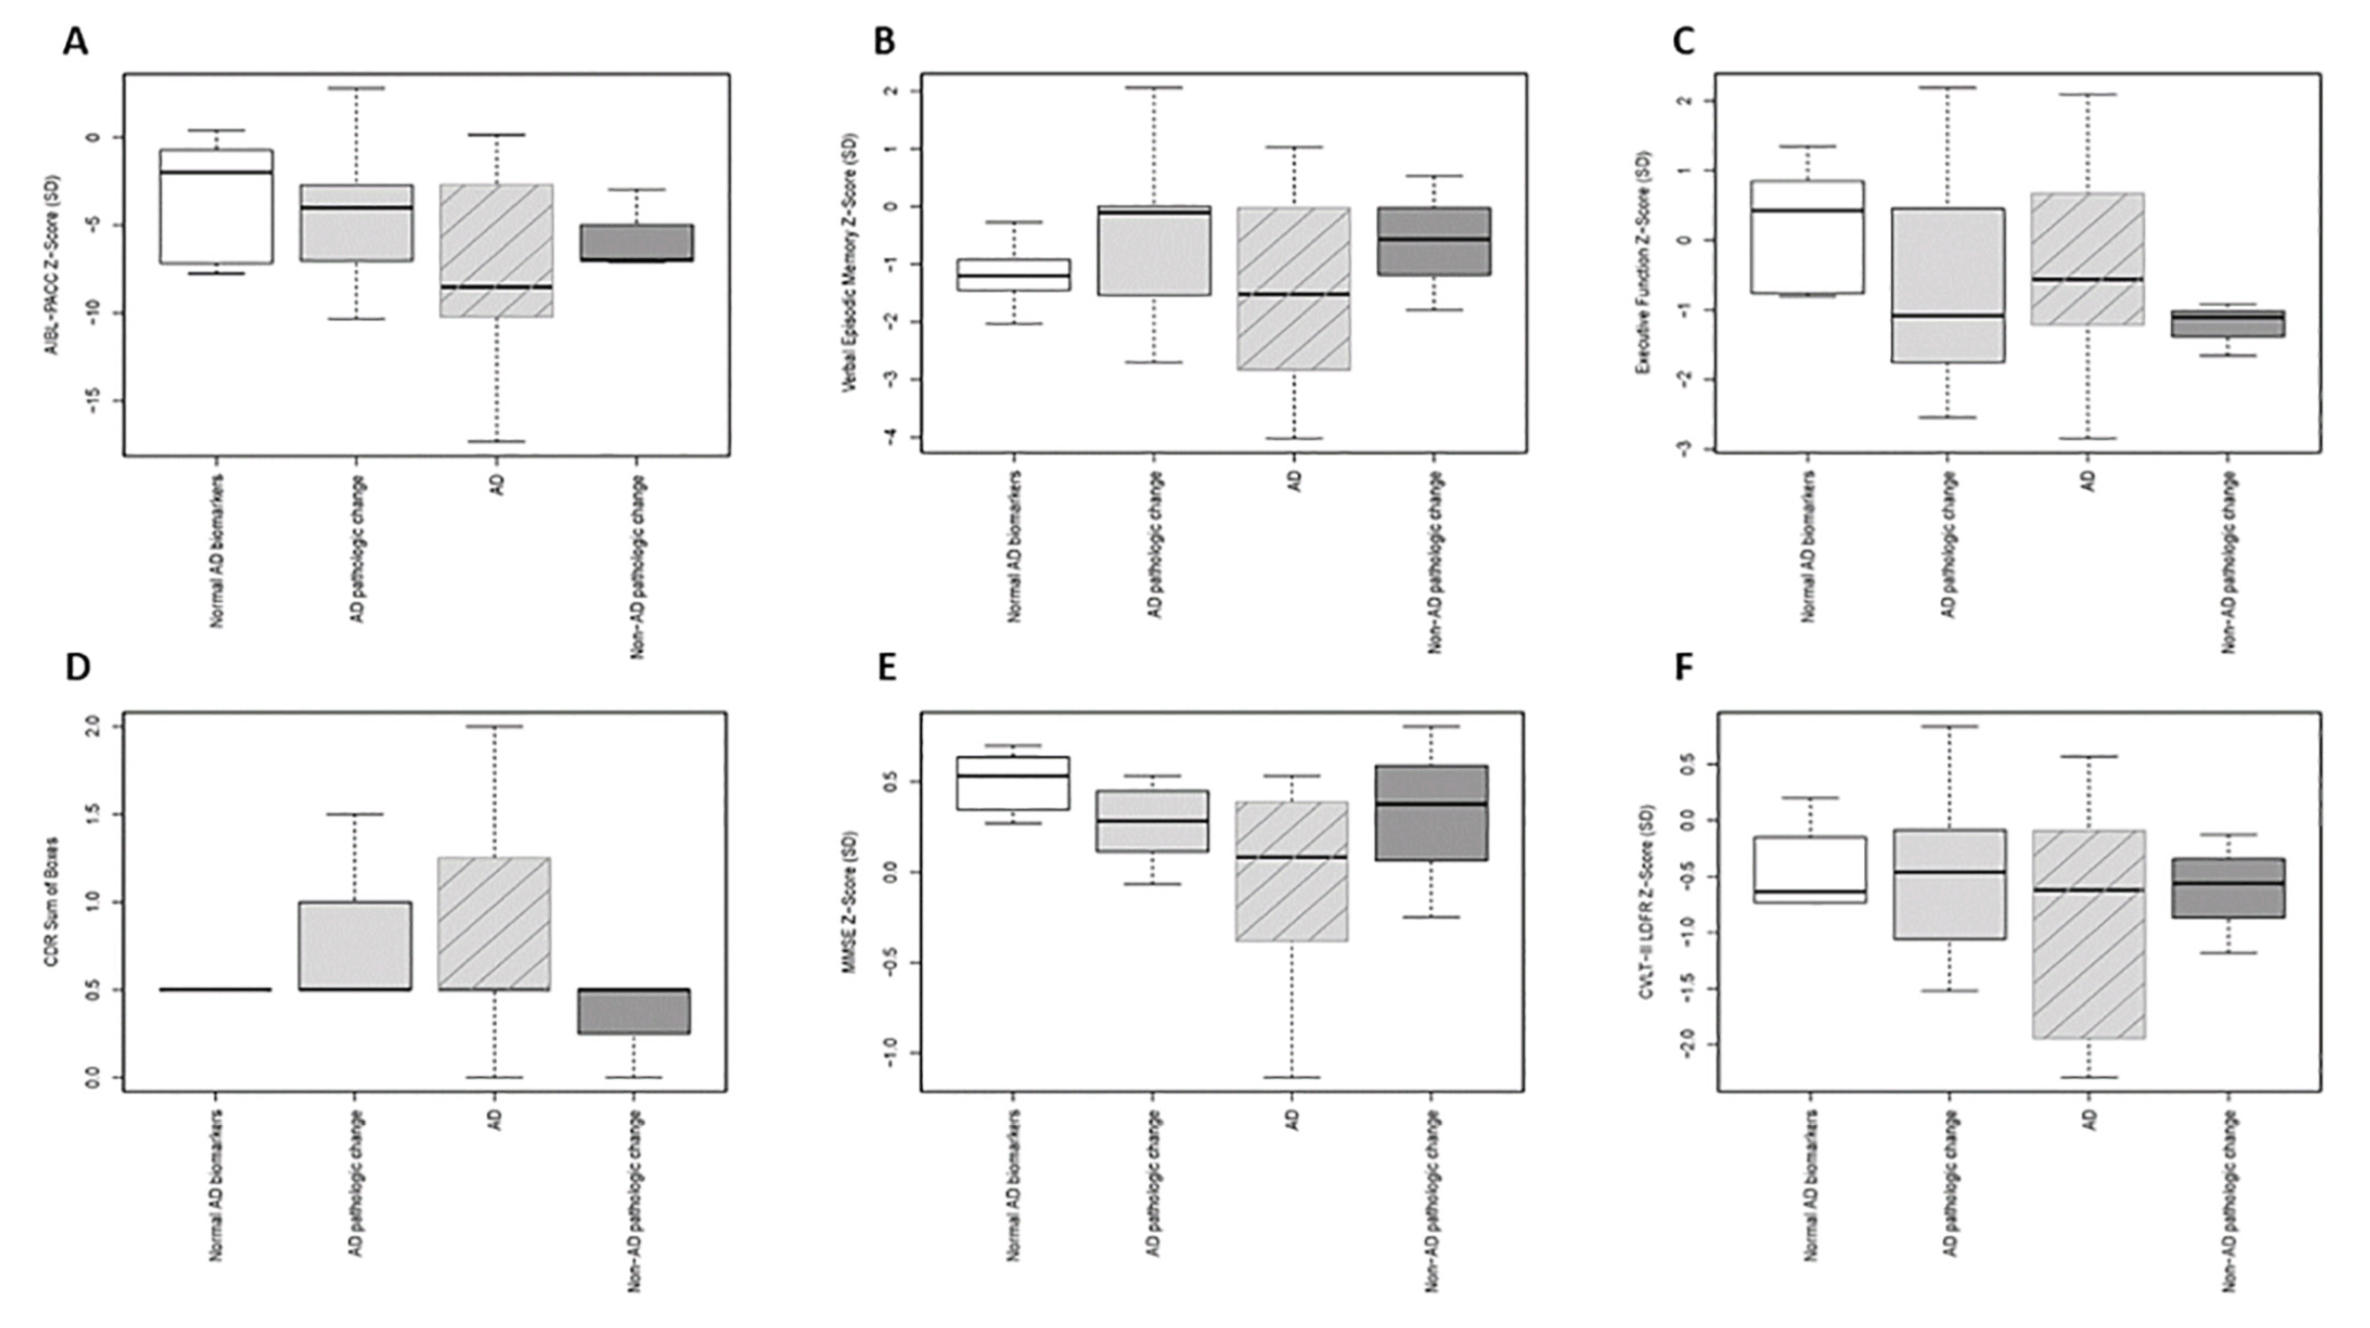 Figure 3. Cross-sectional performance on the six cognitive measures (A: AIBL-PACC; B: Verbal Episodic Memory; C: Executive Function; D: CDR Sum of Boxes; E: MMSE; F: CVLT-II LDFR) for the four contracted AT(N) groups in MCI